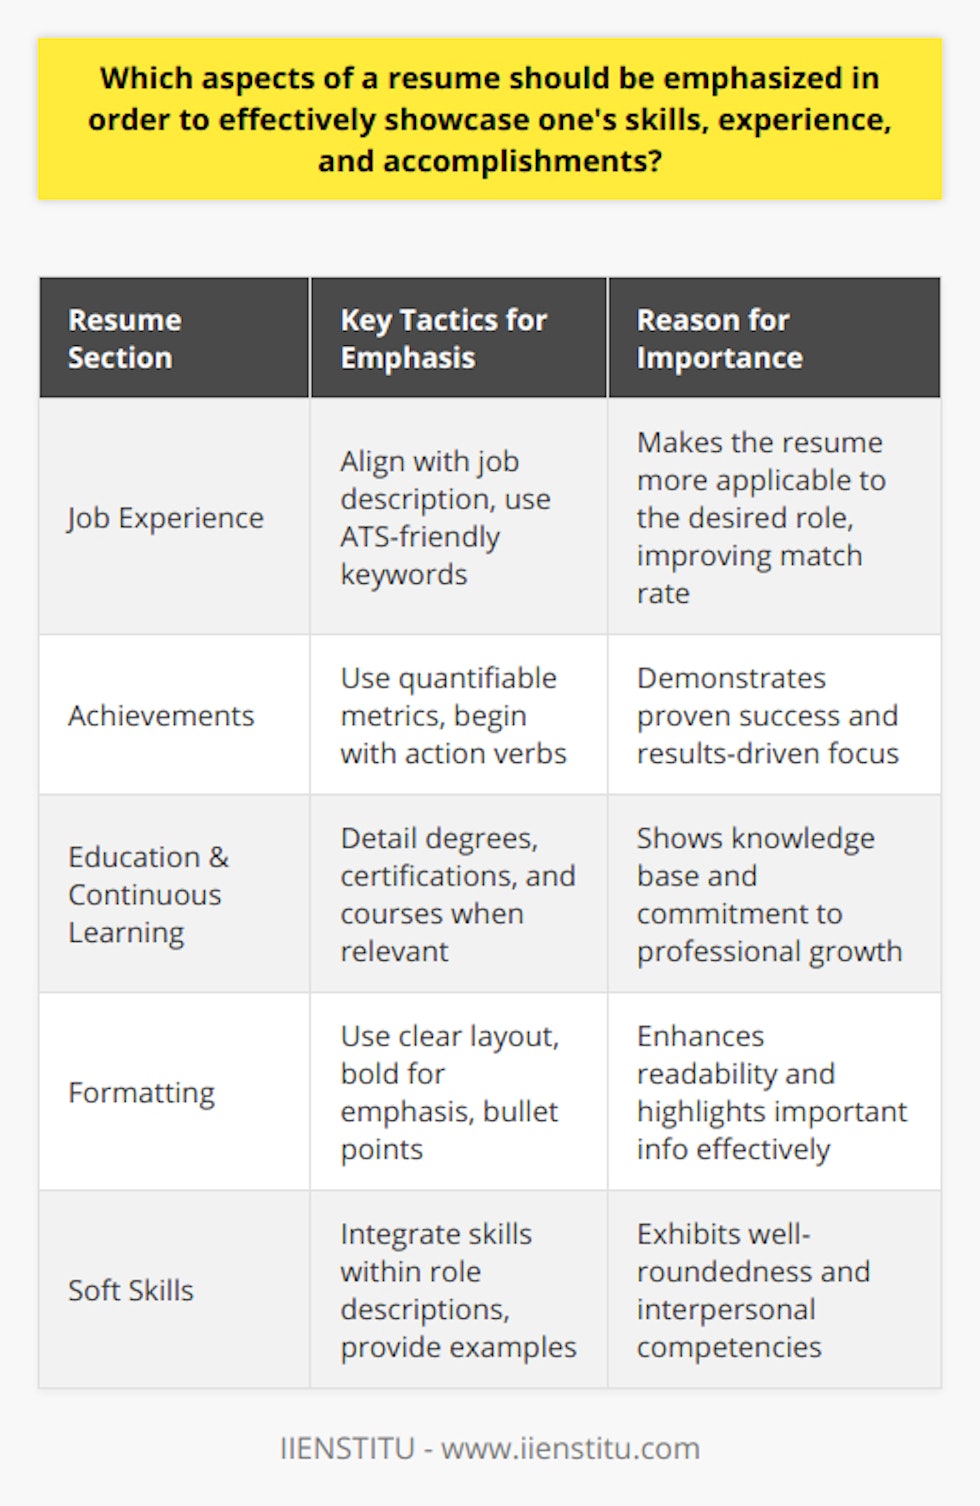 When constructing a resume, it is essential for job seekers to concentrate on certain elements to effectively communicate their qualifications to potential employers. This means paying particular attention to relevant experience, transferable skills, and notable accomplishments while also presenting this information in an easily digestible format.Tailoring the Resume to the Job DescriptionOne of the most effective strategies for a resume is tailoring content to match the job description. This entails carefully reading the job posting, understanding what the employer is looking for, and reflecting this in the resume. Use keywords and phrases from the job description; this is particularly important in an age where Applicant Tracking Systems (ATS) are frequently used to pre-screen candidates. The incorporation of these specific terms can help in ranking the resume higher in the search results within an ATS, increasing visibility.Highlighting Quantifiable AchievementsEmployers tend to look for candidates who can demonstrate a record of success. Focusing on accomplishments, particularly those that are quantifiable, allows for a better illustration of an individual’s capabilities. This could involve sales figures achieved, cost savings made through process improvements, or increased efficiency metrics. Presenting accomplishments through bullet points and starting each one with action verbs can create a powerful impact. Candidates should focus on outcomes that show how they added value in their previous positions.Education and Continuous LearningCandidates should not underestimate the power of showcasing their educational background and commitment to continuous learning, especially in fields that rapidly evolve. This may include formal degrees, certifications, professional development courses, or independent learning pursuits. When relevant to the job, candidates should emphasize their educational endeavors to demonstrate their knowledge base and dedication to growth—a trait highly appreciated in many industries.Effective Formatting for EmphasisThe formatting of a resume can greatly affect its readability and the ability to highlight critical information. Using a clear, professional layout with strategic use of bold for job titles or achievements makes the document more navigable. Depending on the industry, some creative flair may be beneficial, but it must not detract from the content. To maintain a clean appearance, it is advised to use bullet points for listing items and to avoid overly dense blocks of text. The top third of the resume is prime real estate; thus, this area should immediately showcase the candidate's most compelling qualifications and draw the reader in.Soft Skills and AdaptabilityWhile technical skills are crucial, soft skills like communication, leadership, and adaptability should also be on display in a resume. These can be woven into both the skills section and the descriptions of each role. By providing examples of teamwork, problem-solving, or times when adaptability was essential, candidates can present themselves as well-rounded professionals.In conclusion, the careful curation of a resume, centering on customization to the job role, highlighting quantitative achievements and key skills, and using effective formatting, can substantially elevate a candidate’s perceived value. Integrating these tactics will aid applicants in illustrating their unique professional narrative and standing out in a competitive job market.